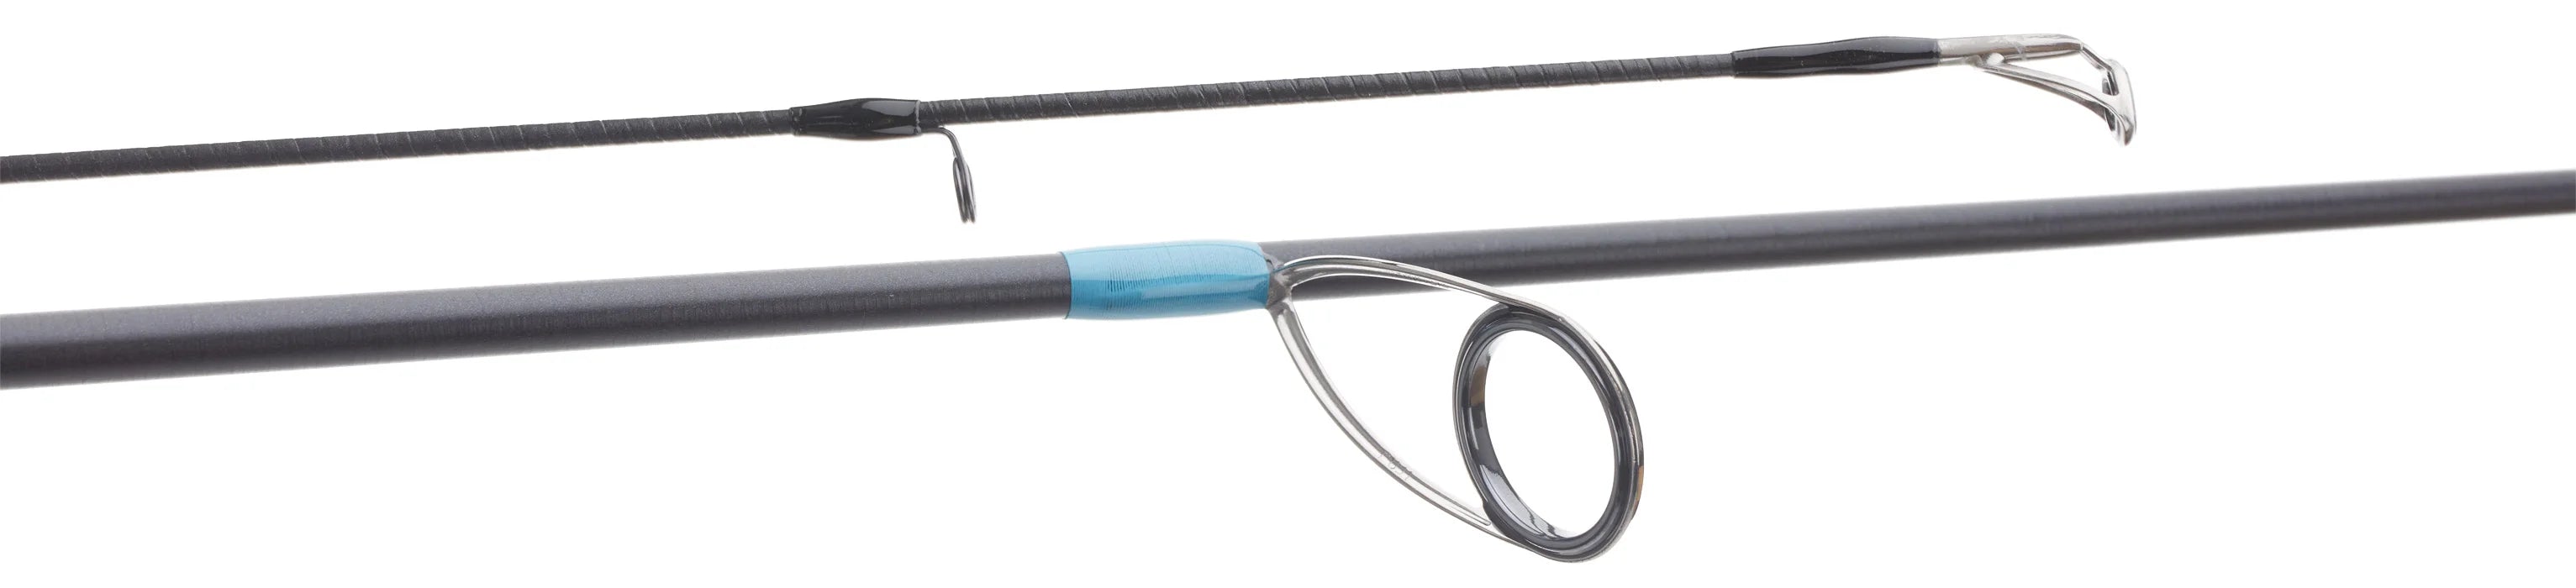 G. LOOMIS NRX+ SPIN JIG SPINNING RODS